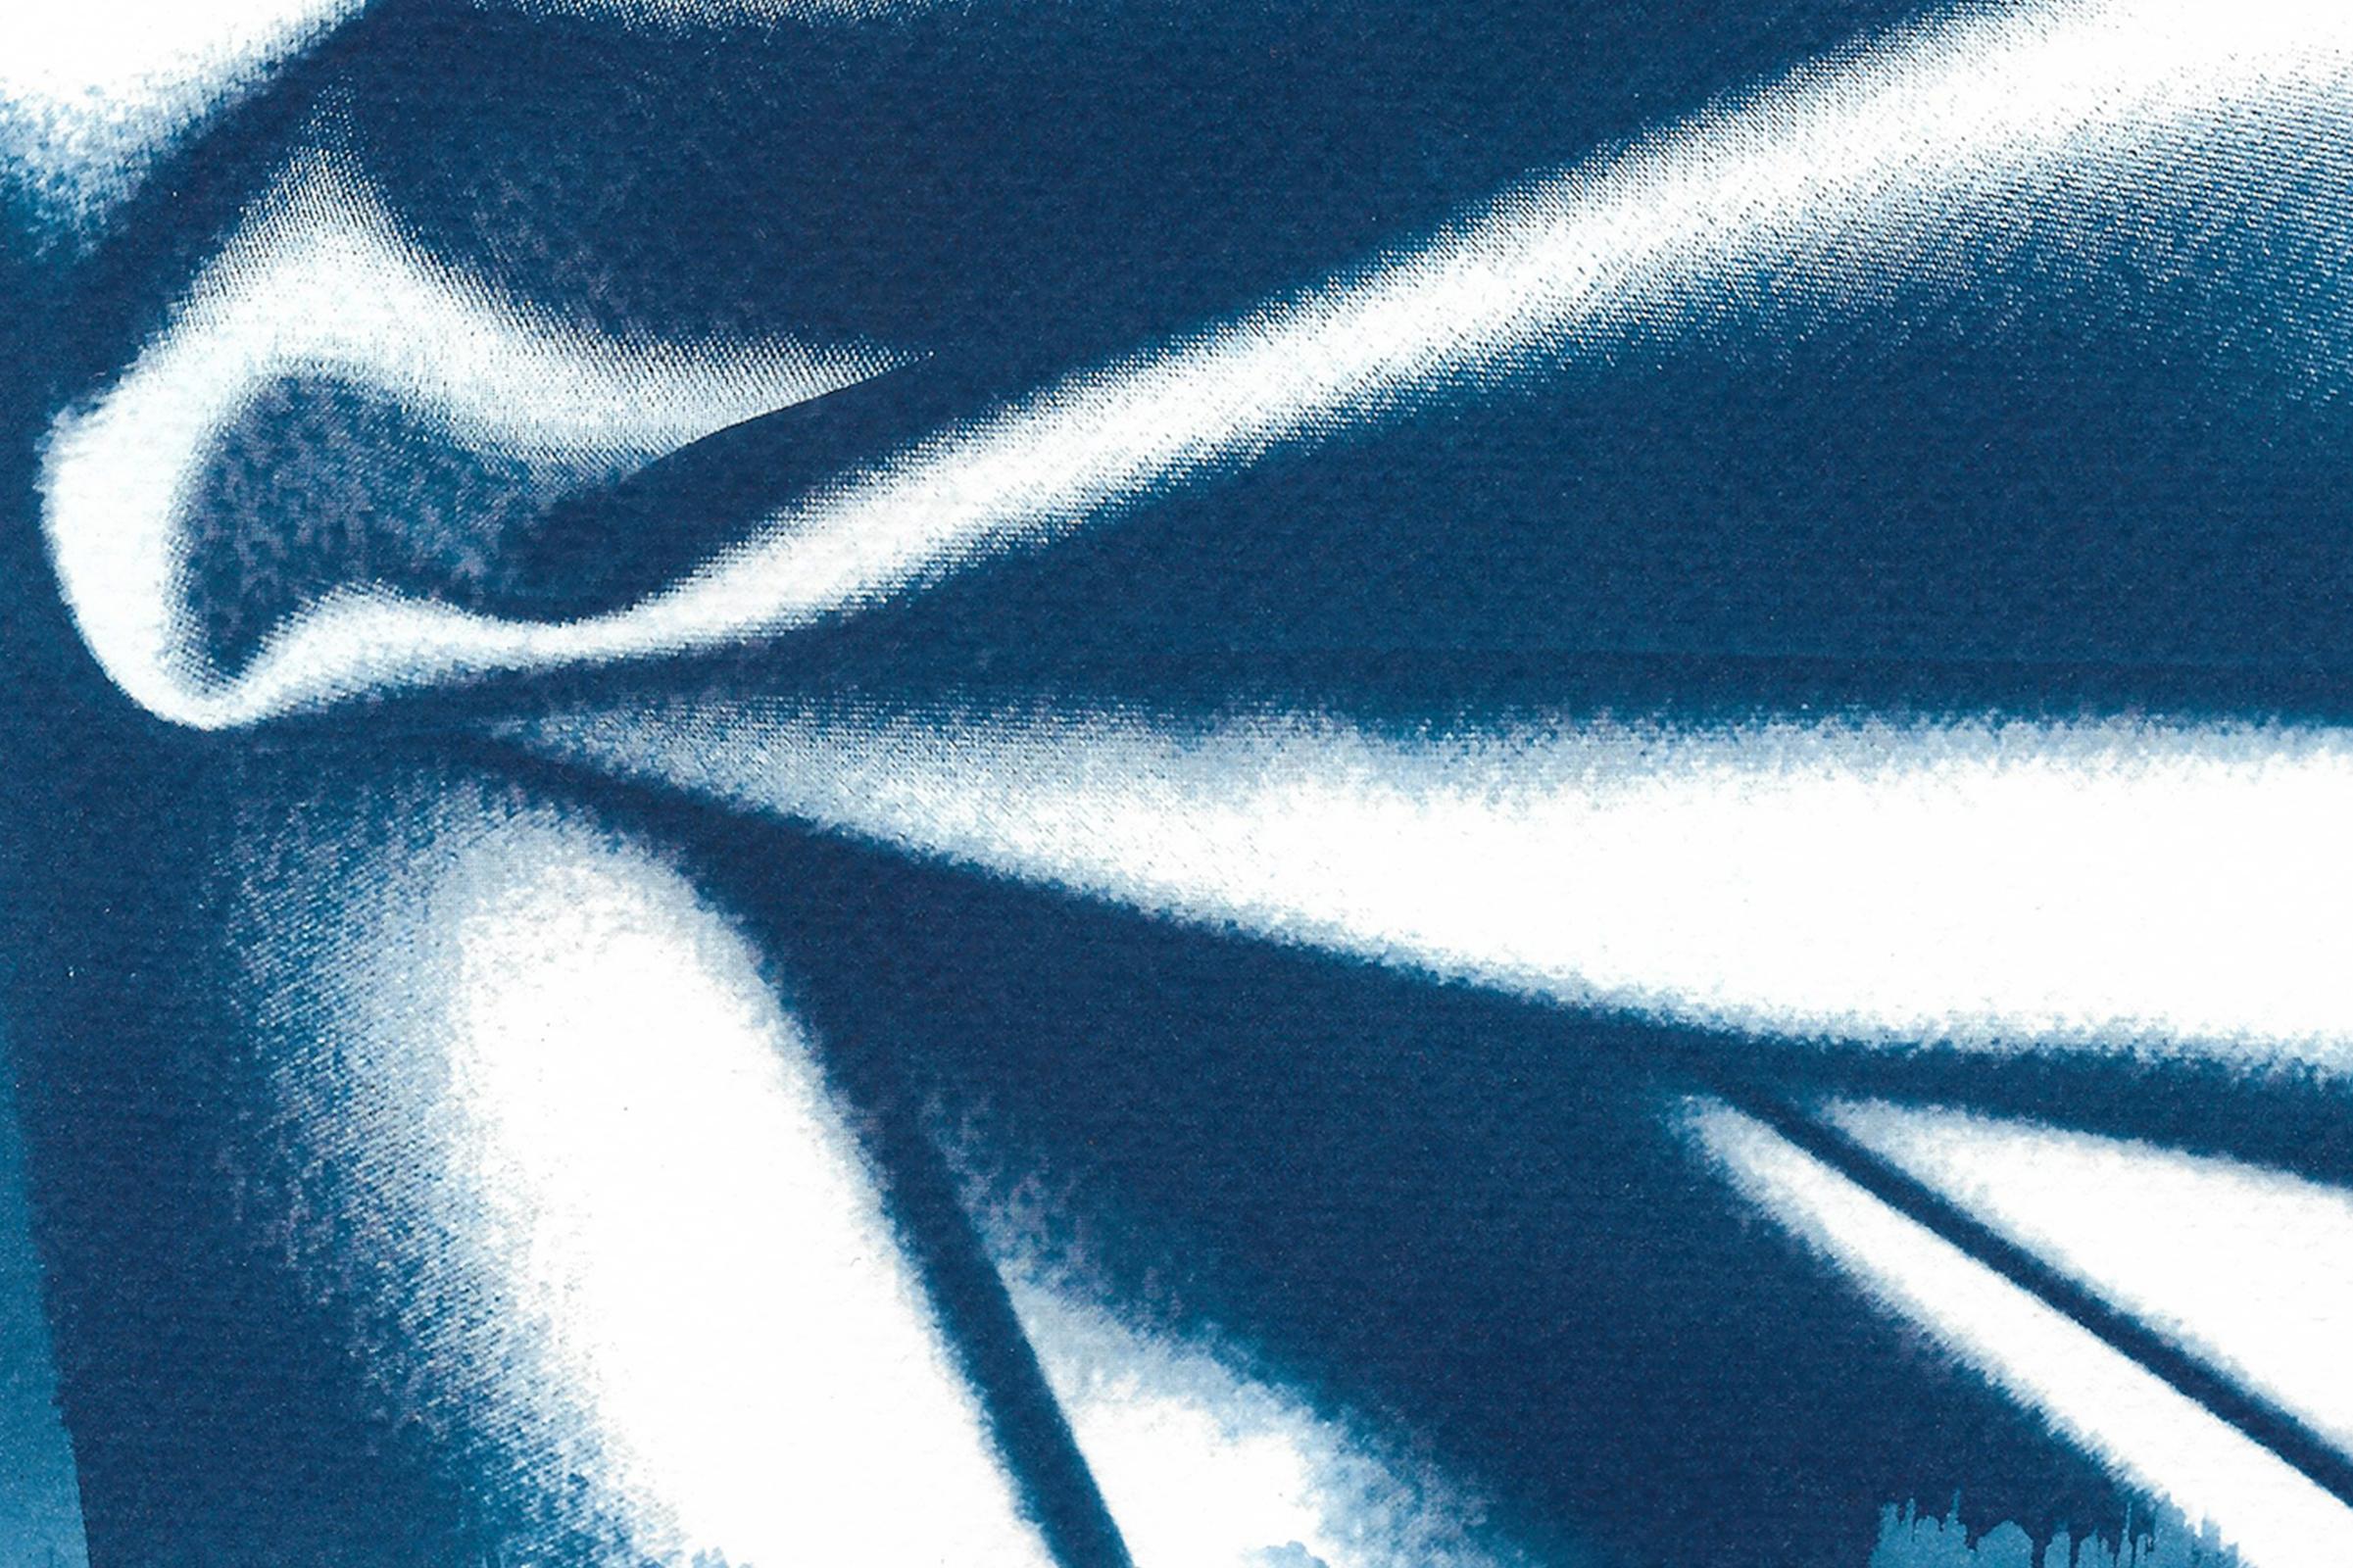 Abstract Wavy Silk Pattern in Classic Blue, Cyanotype Print, Subtle Gesture  2